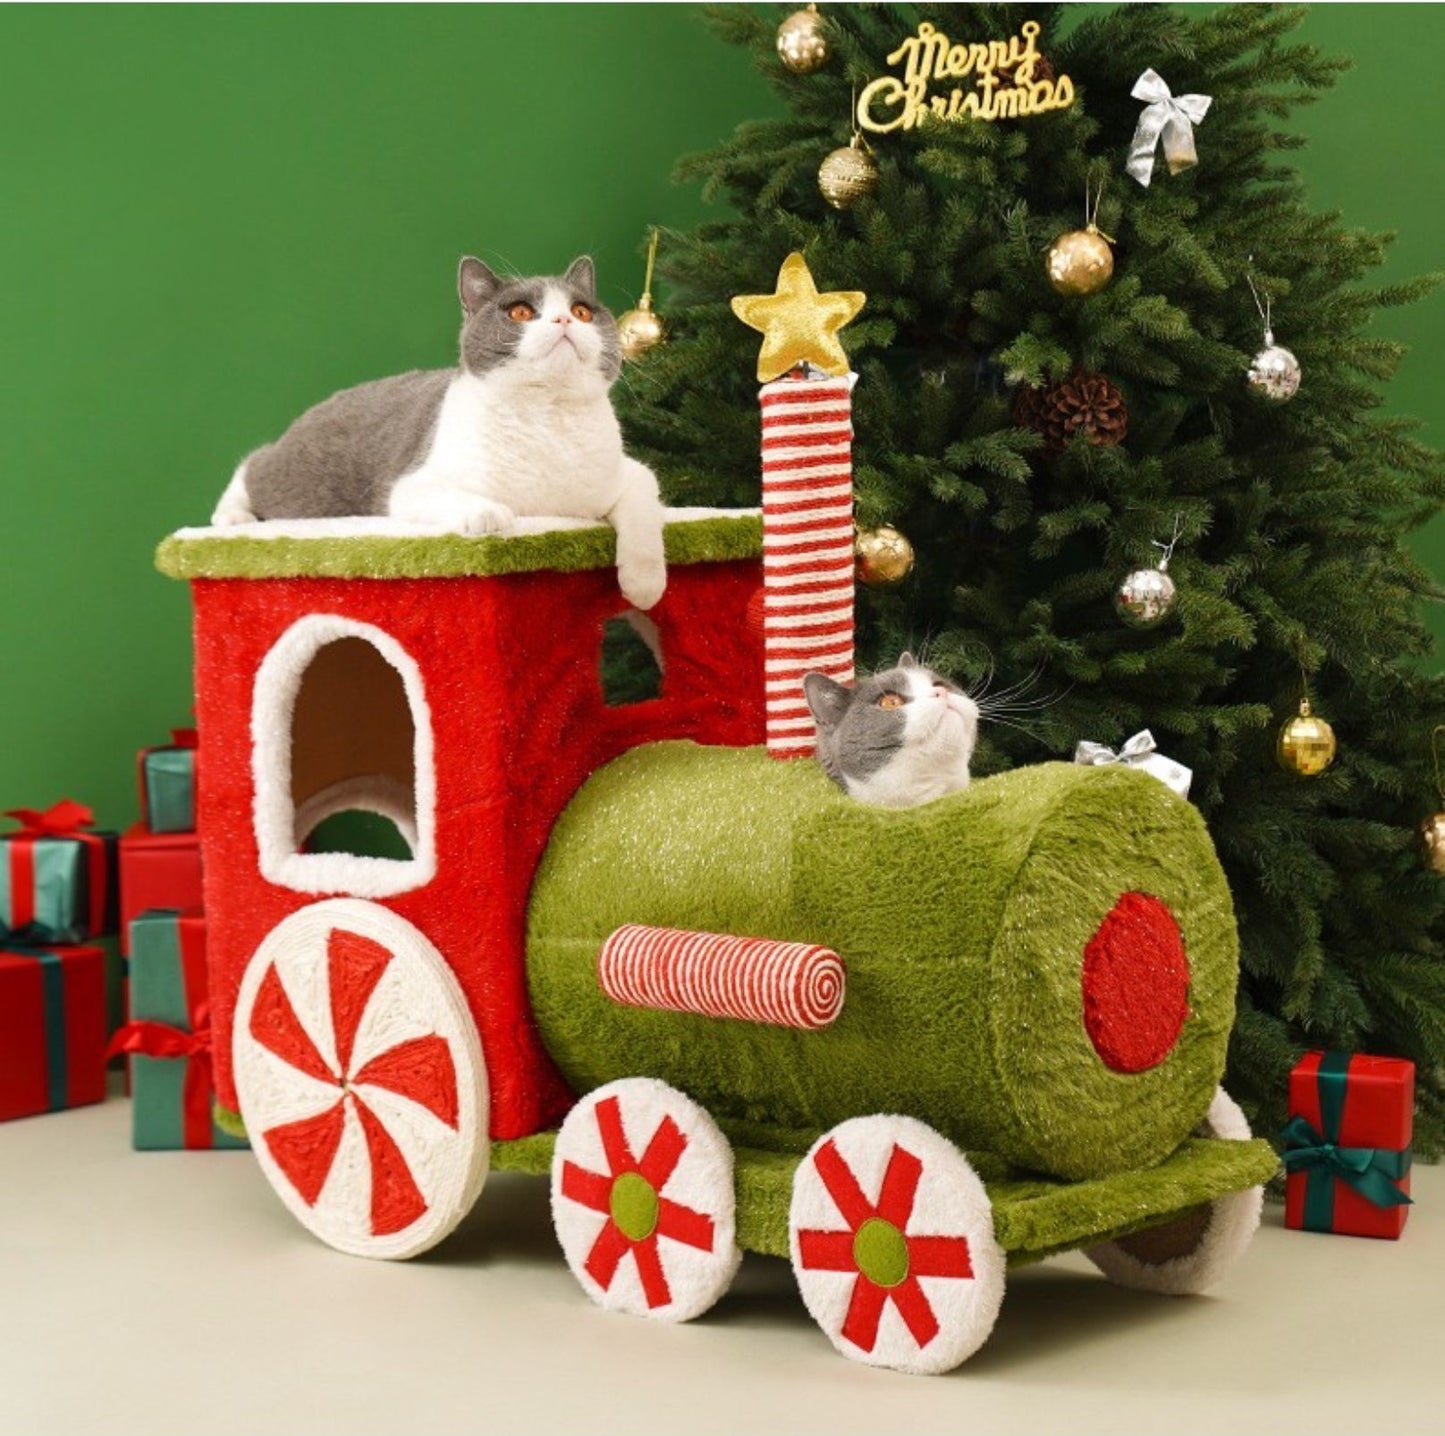 ZeZe Christmas Train Cat Climbing Frame and House Large Cat Toy